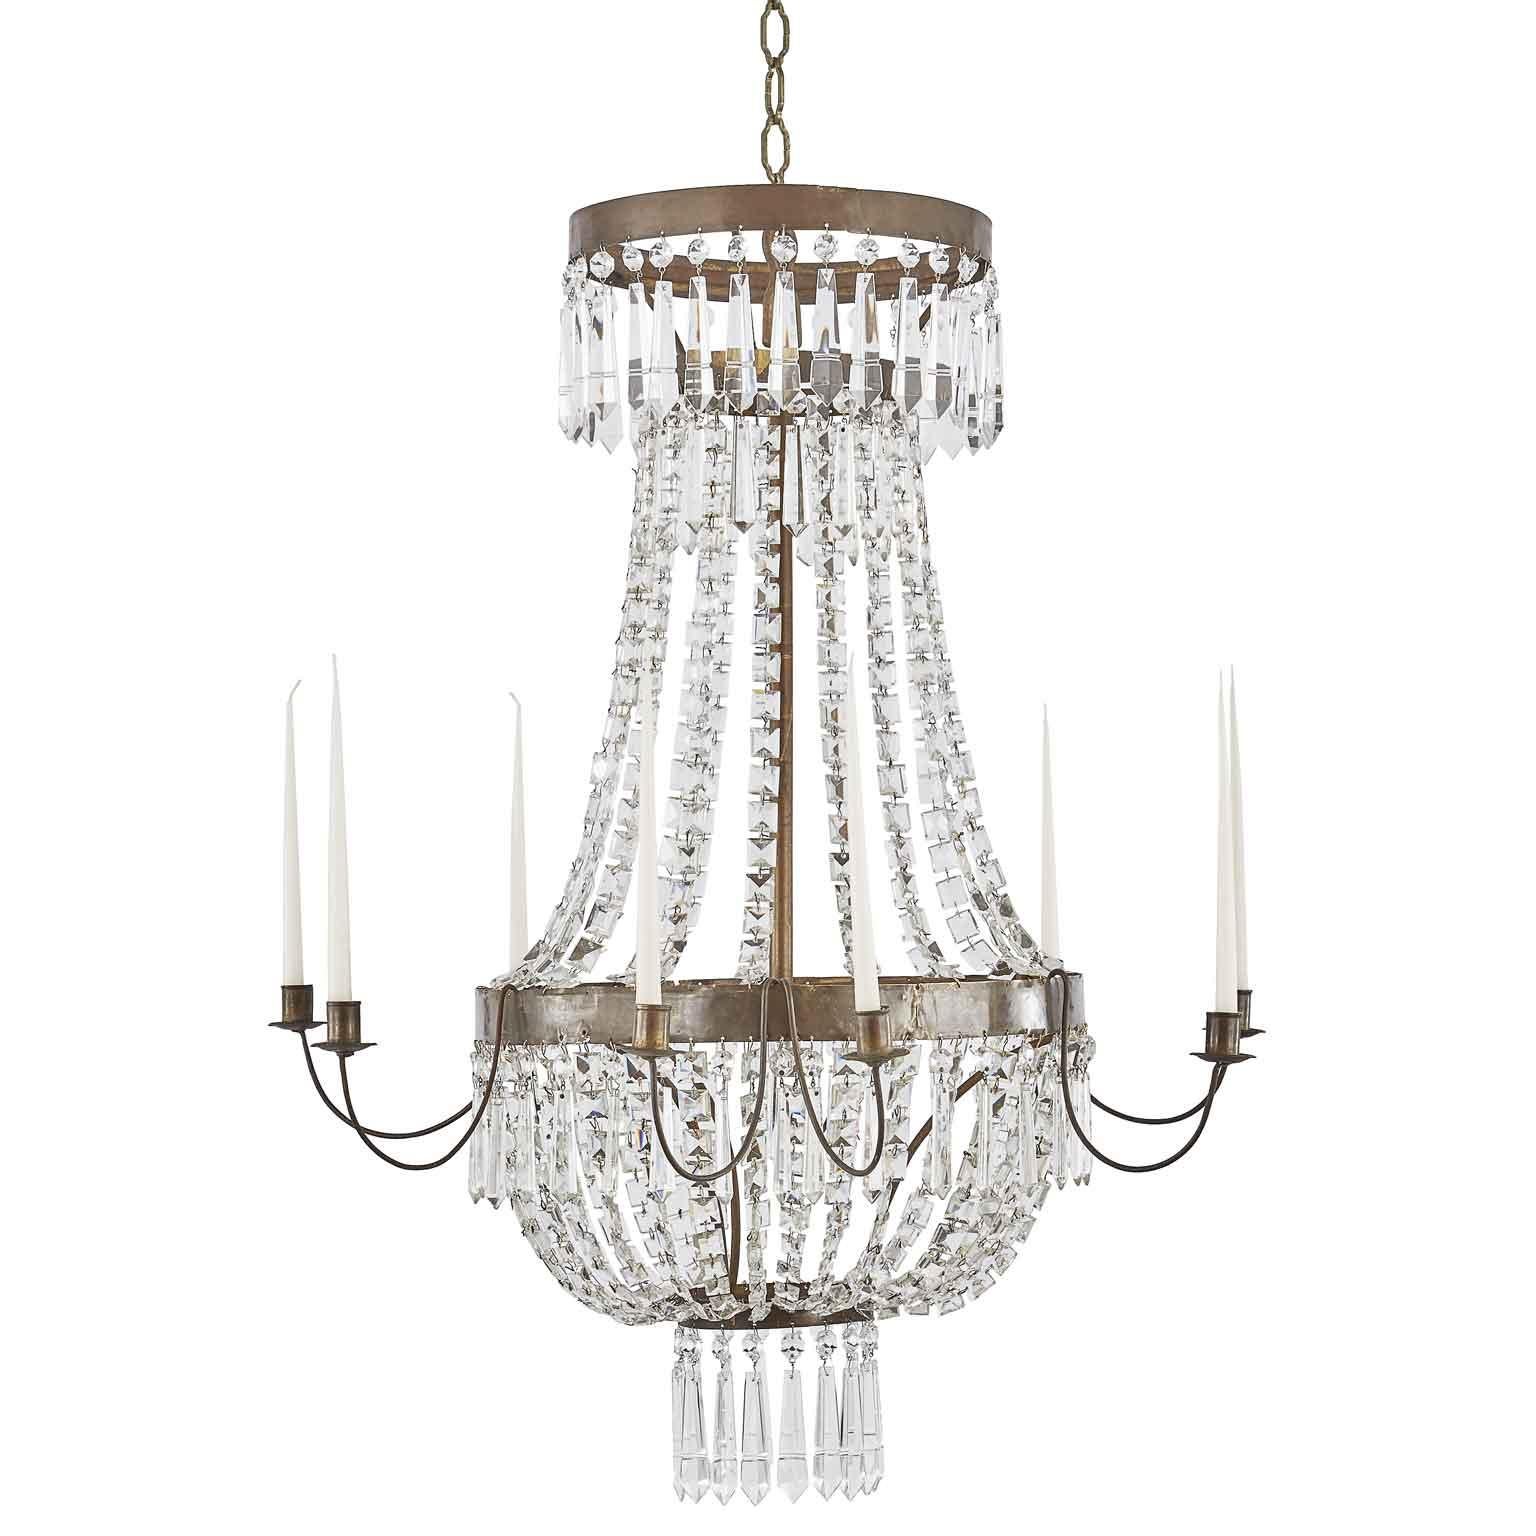 Faceted 19th Century Italian Empire Crystal Candle Chandelier For Sale